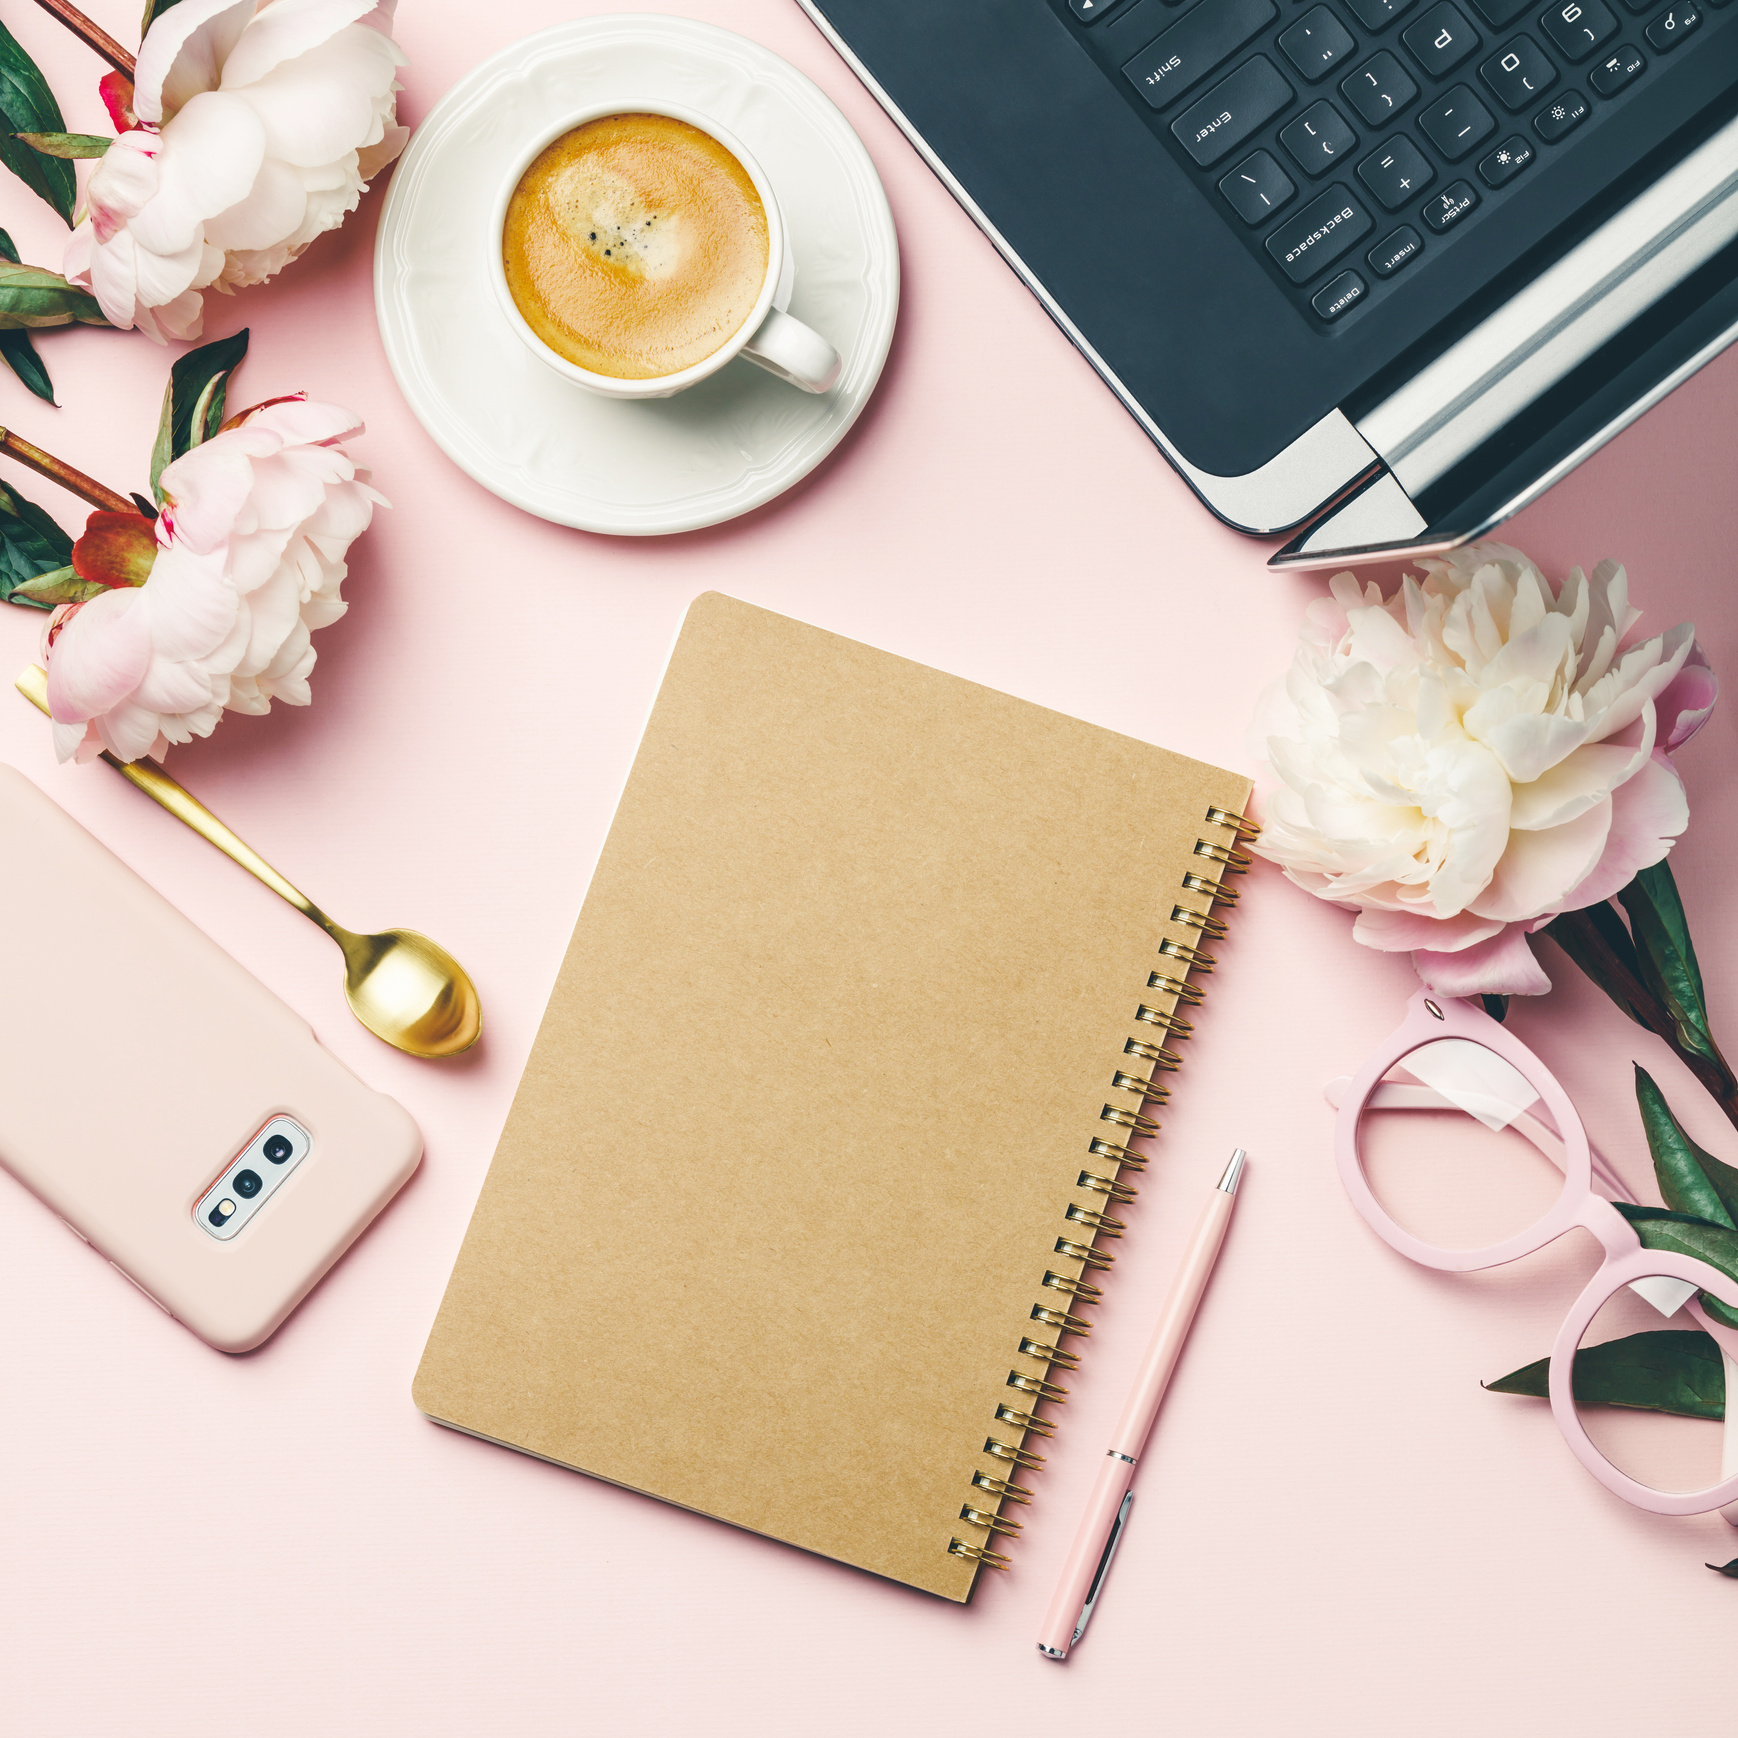 Laptop, Coffee, Flowers, Notebook, and Smartphone Flatlay